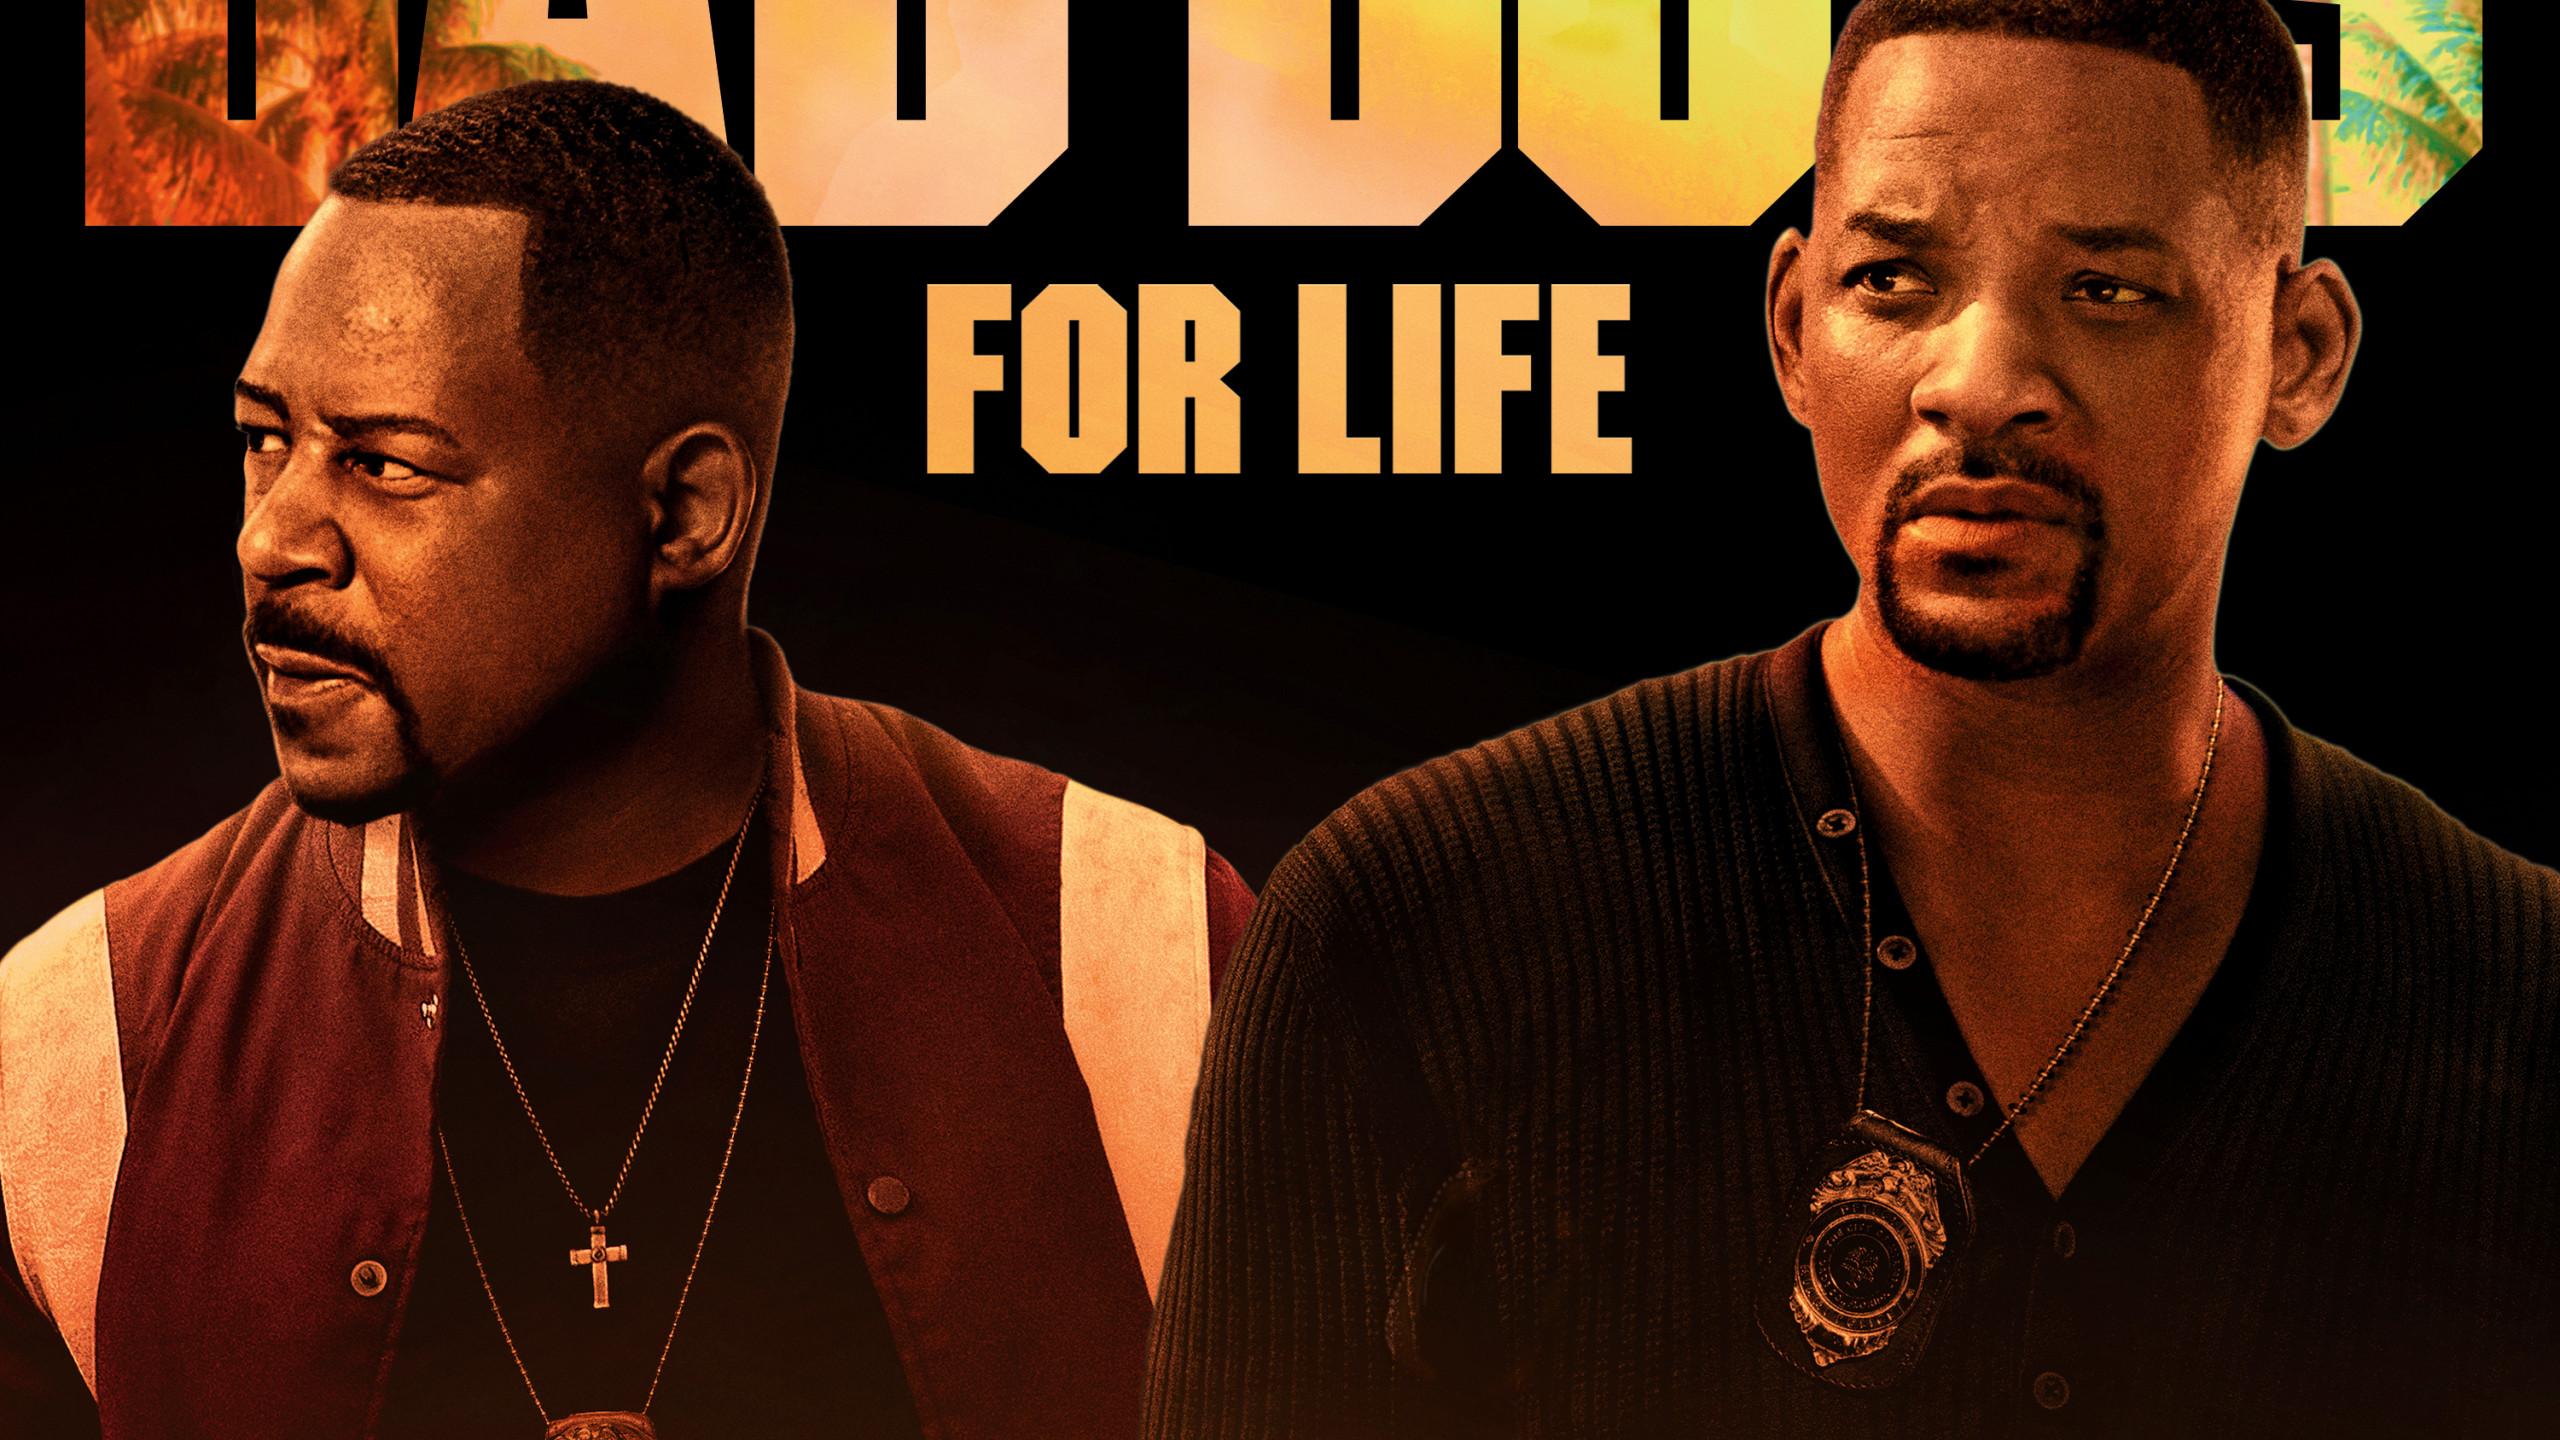 Like Miami, 'Bad Boys for Life' soundtrack is hot and fun